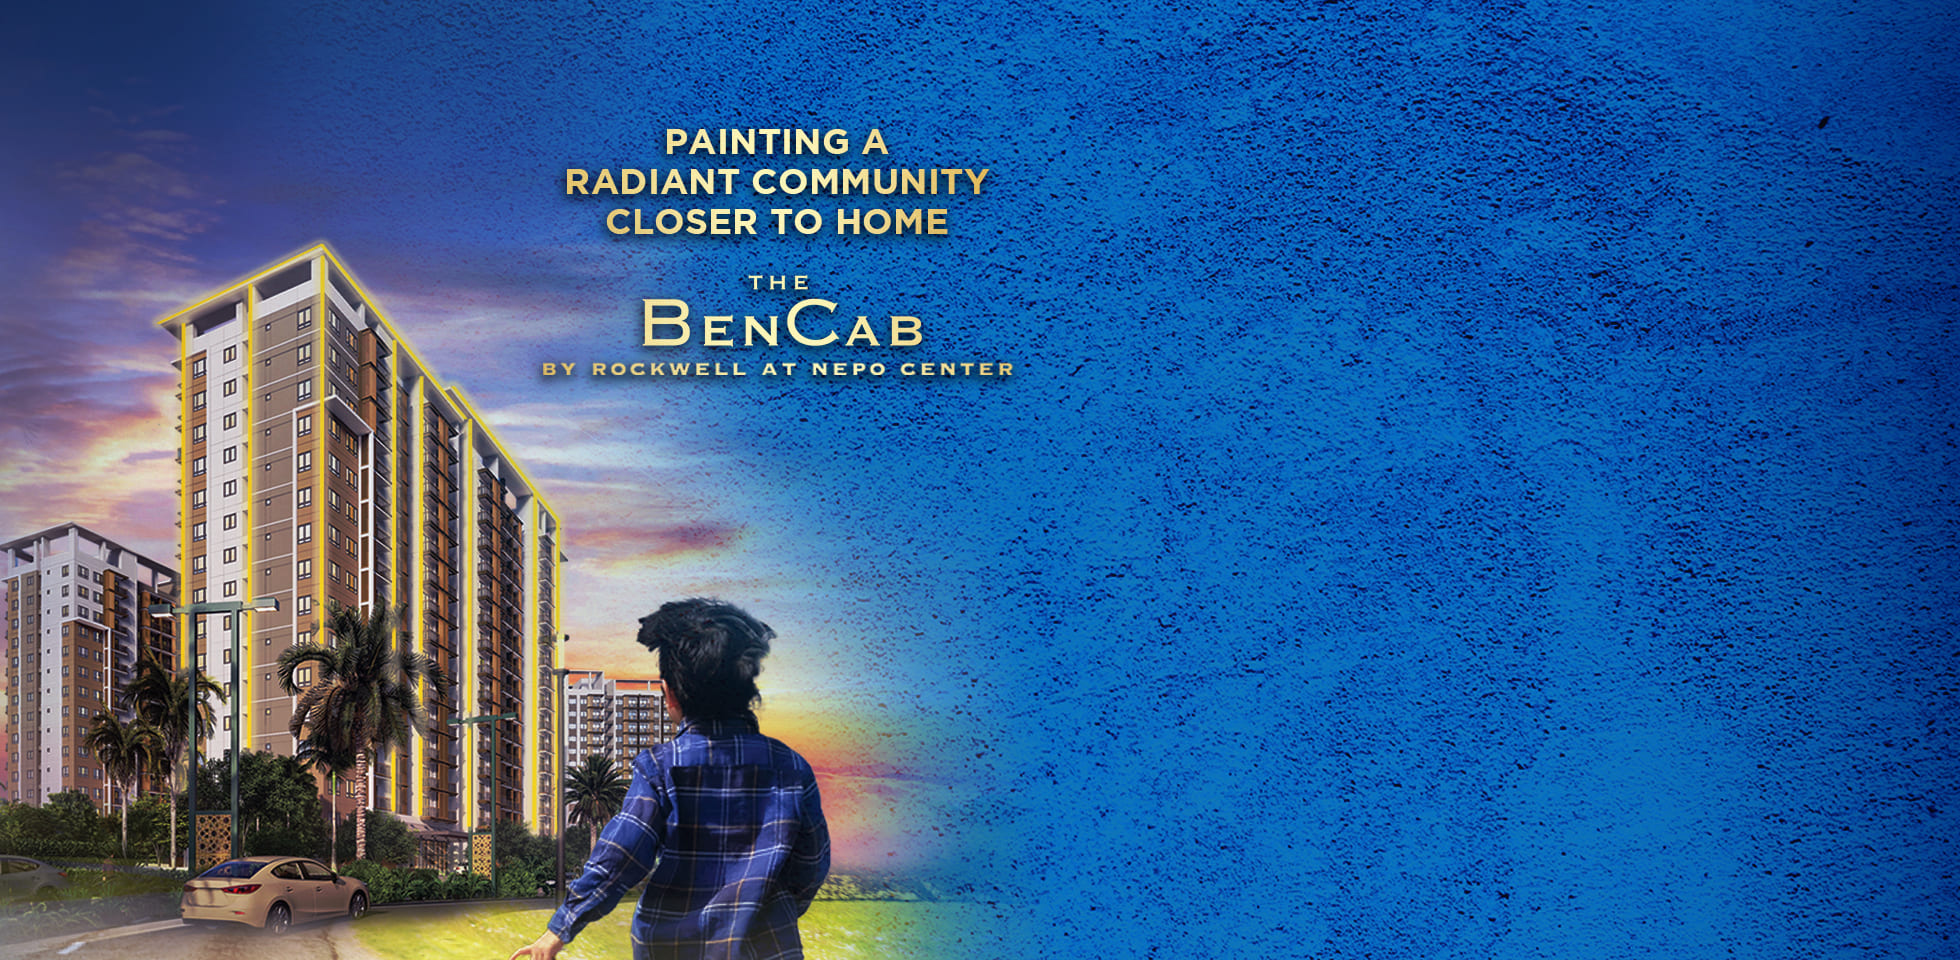 BenCab pantings are posted at Rockwell Nepo Center to bring the radiant community closer to home in a residential property